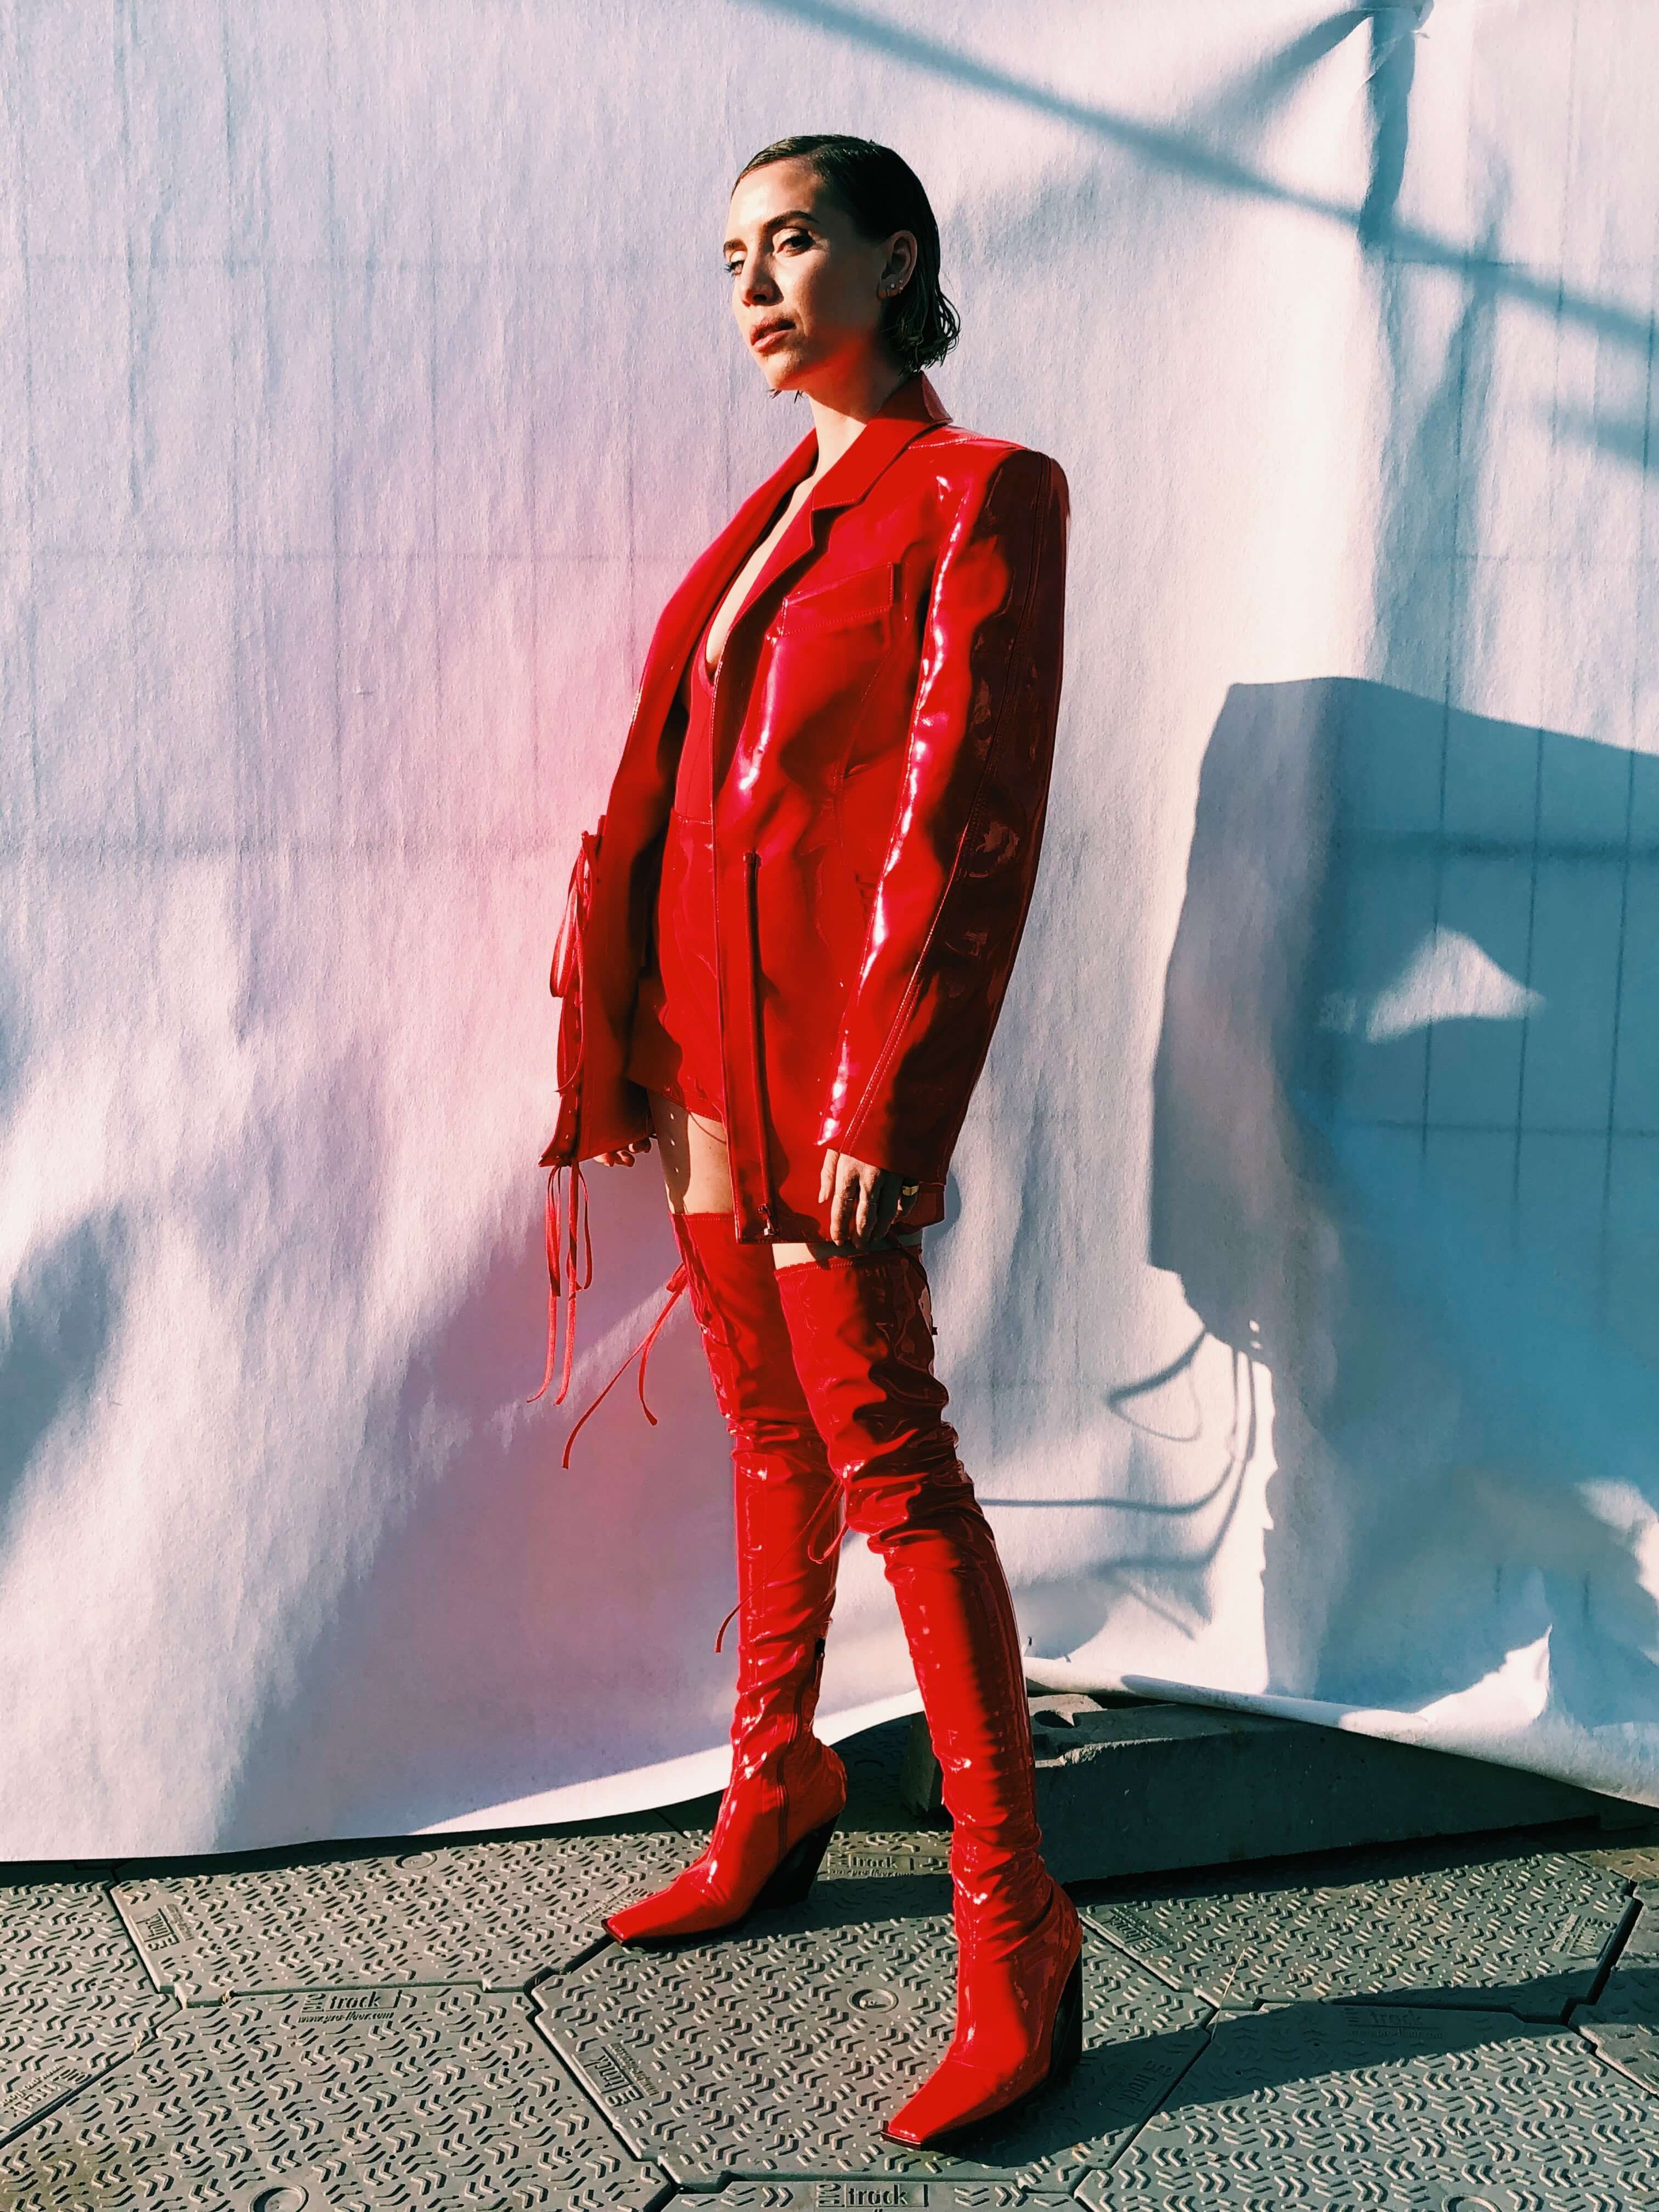 Lykke Li in red leather Mugler outfit